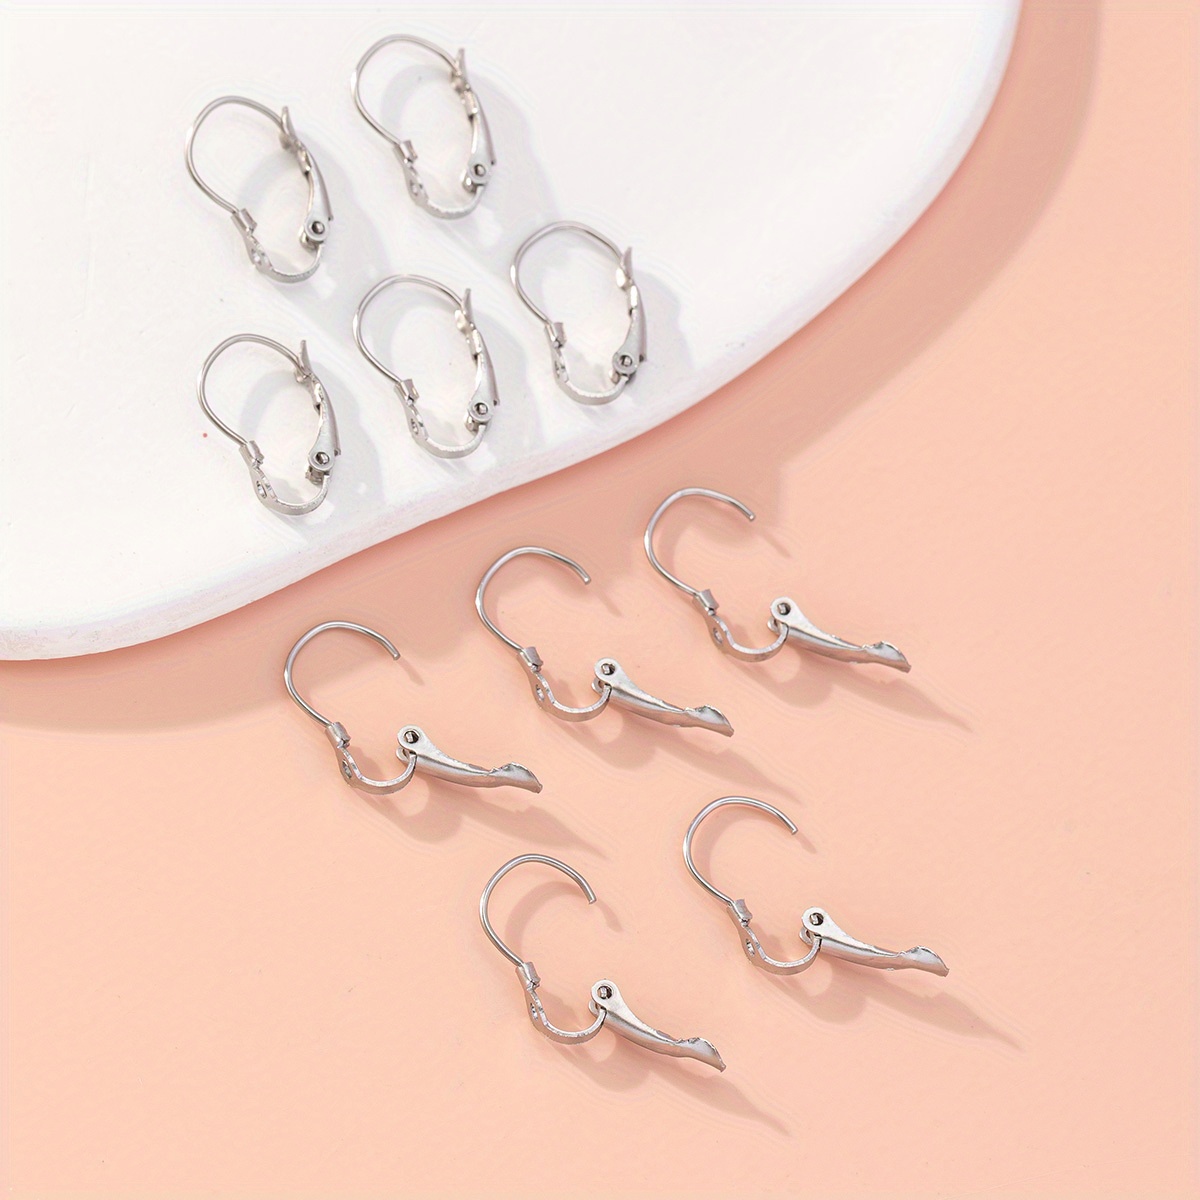 10pieces/set Earring Hooks Hypoallergenic Ear Wires For Jewelry